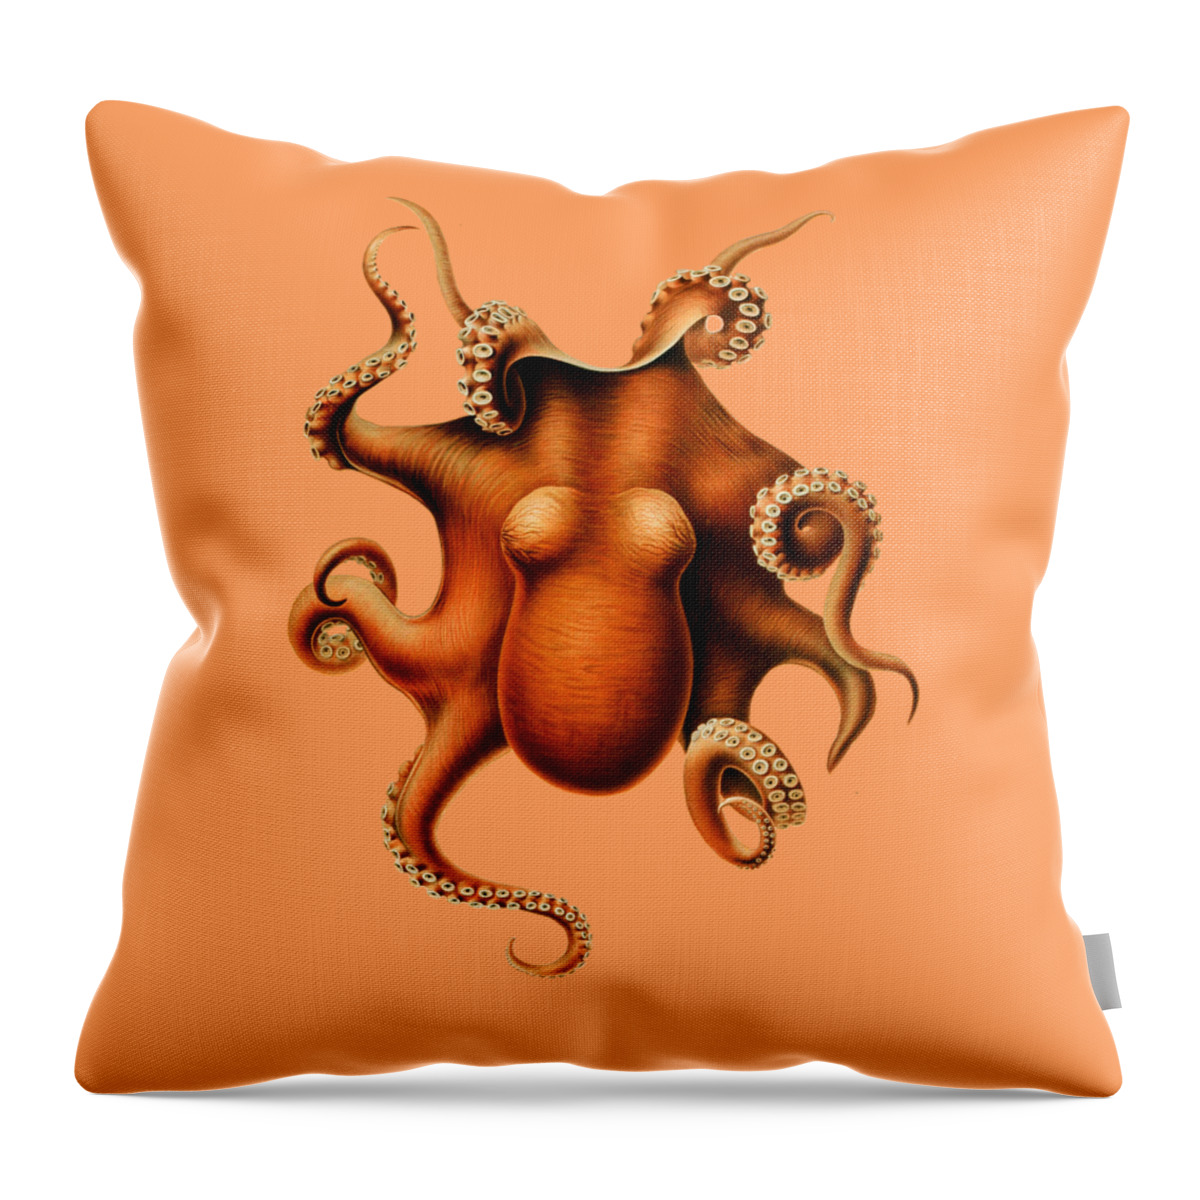 Octopus Throw Pillow featuring the digital art Giant Octopus by Madame Memento